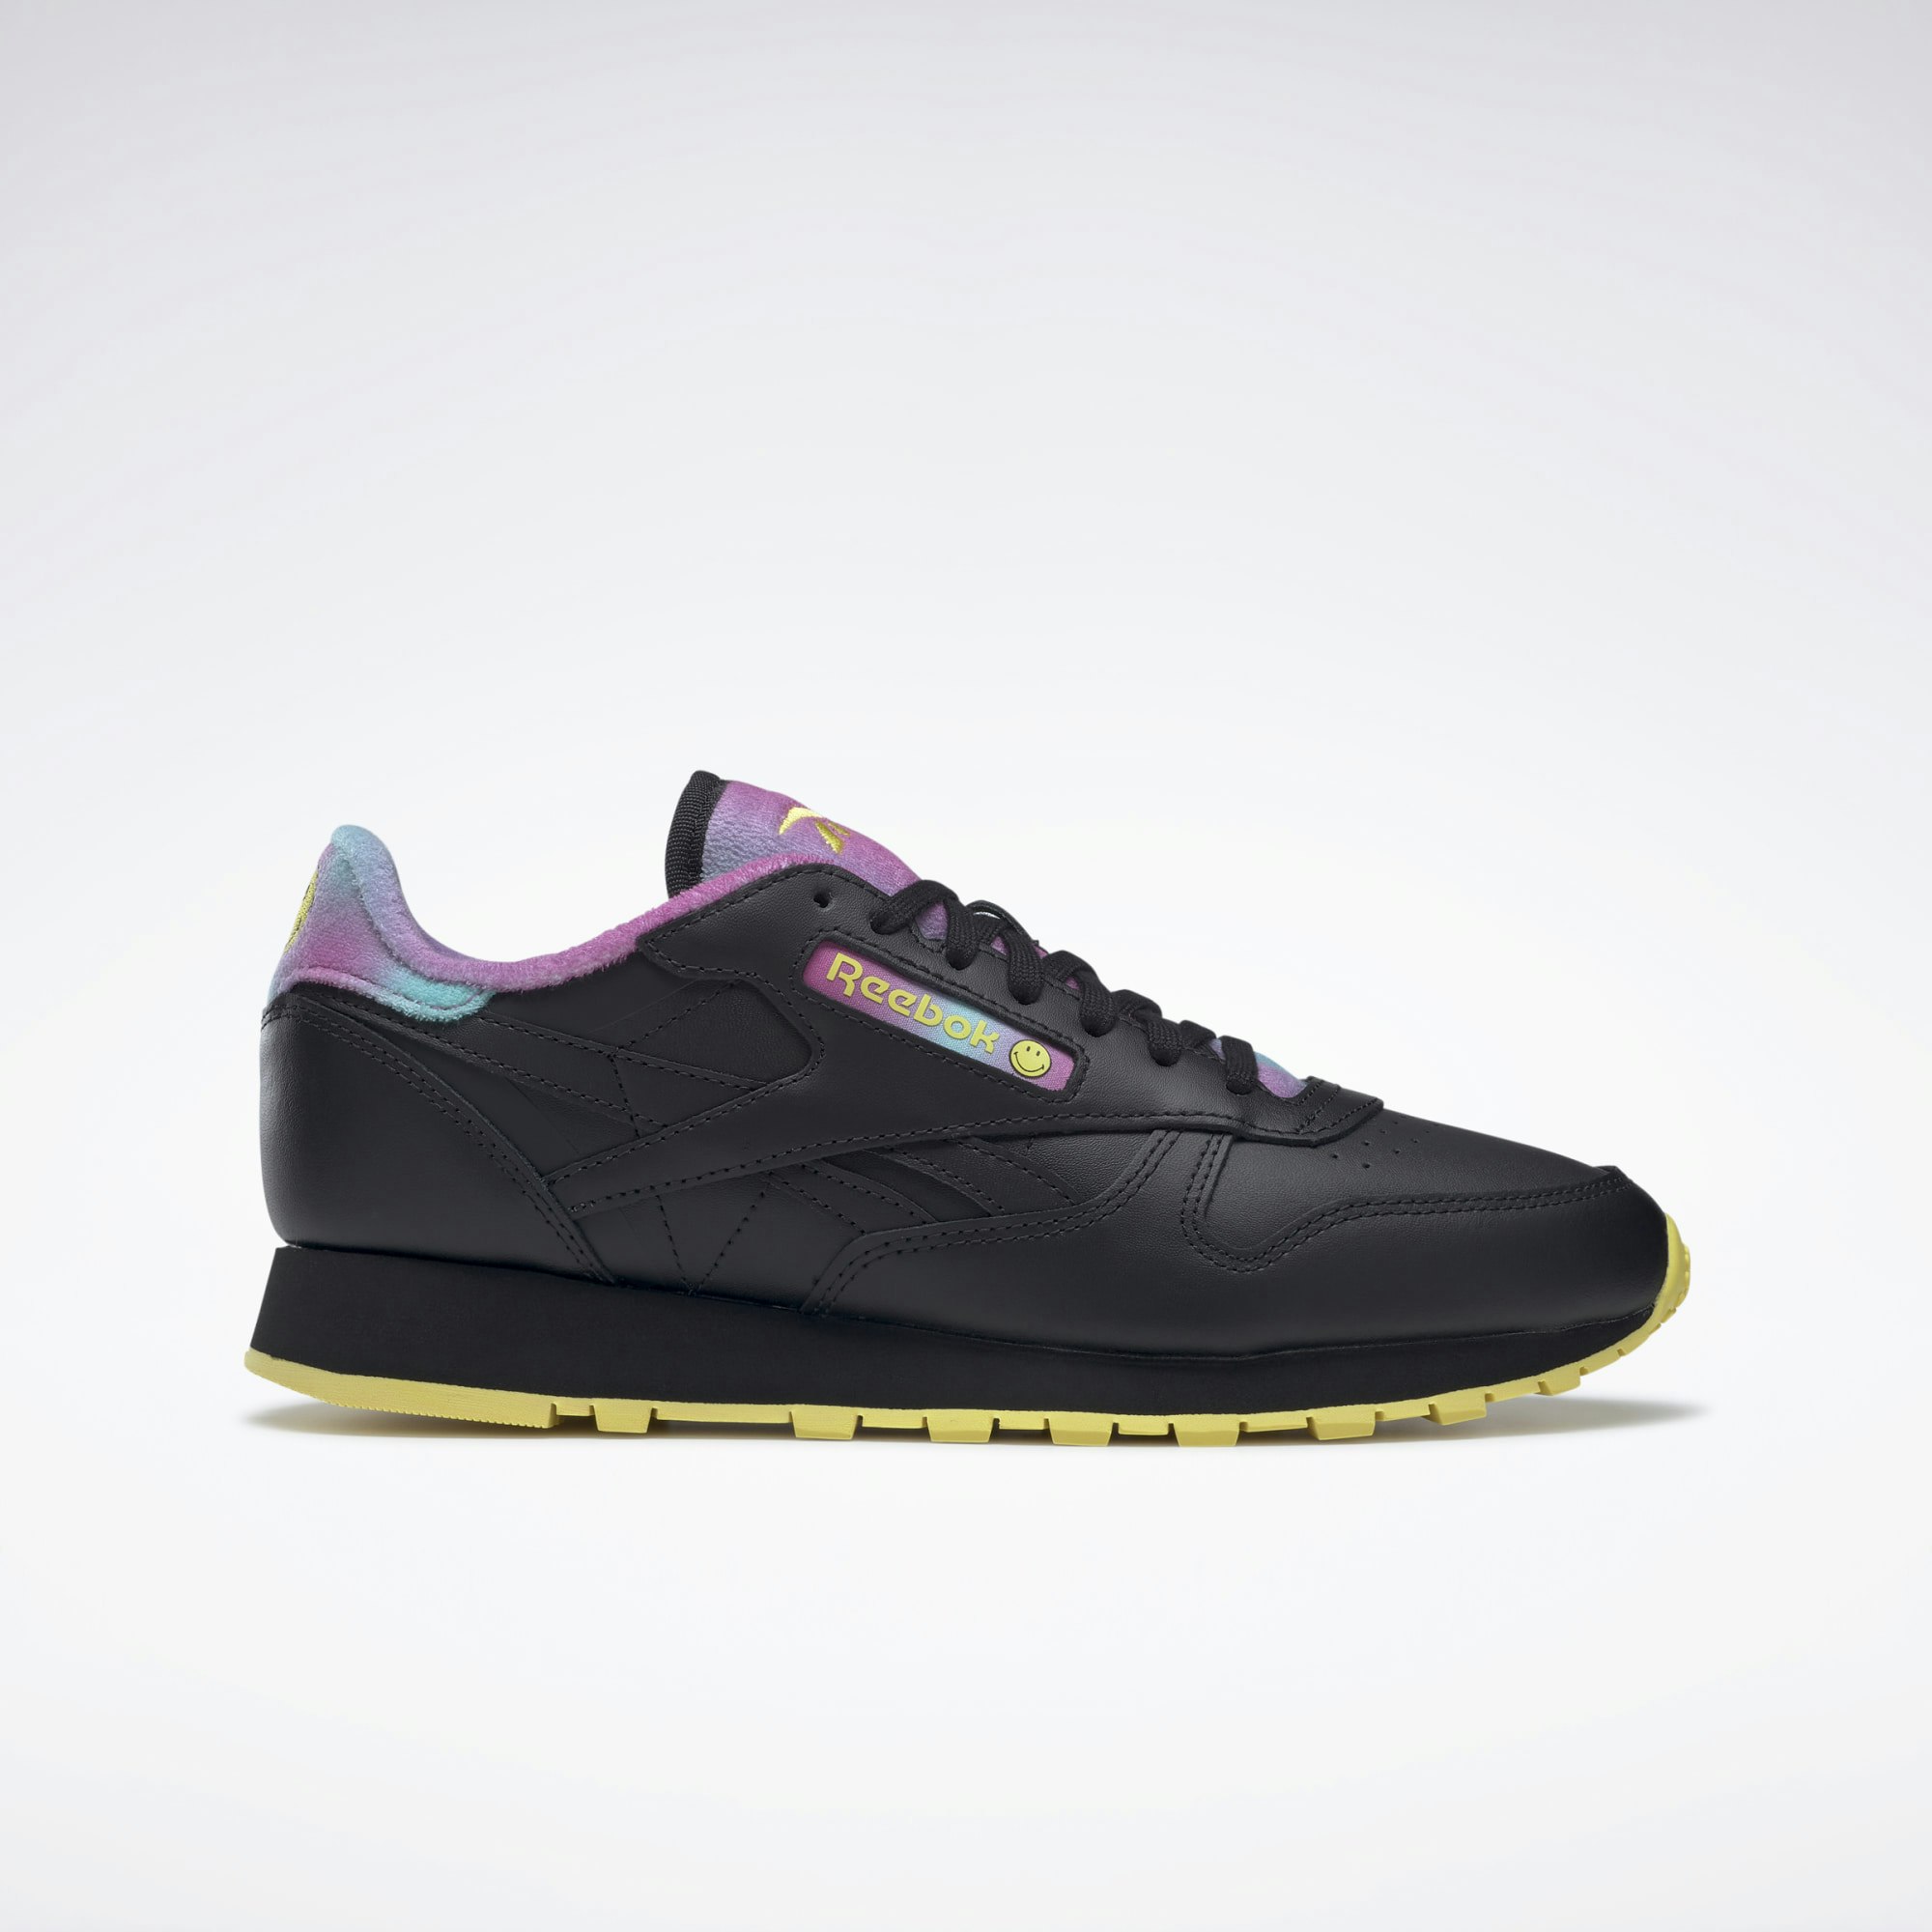 Smiley x Reebok Classic Leather "Ultraberry"